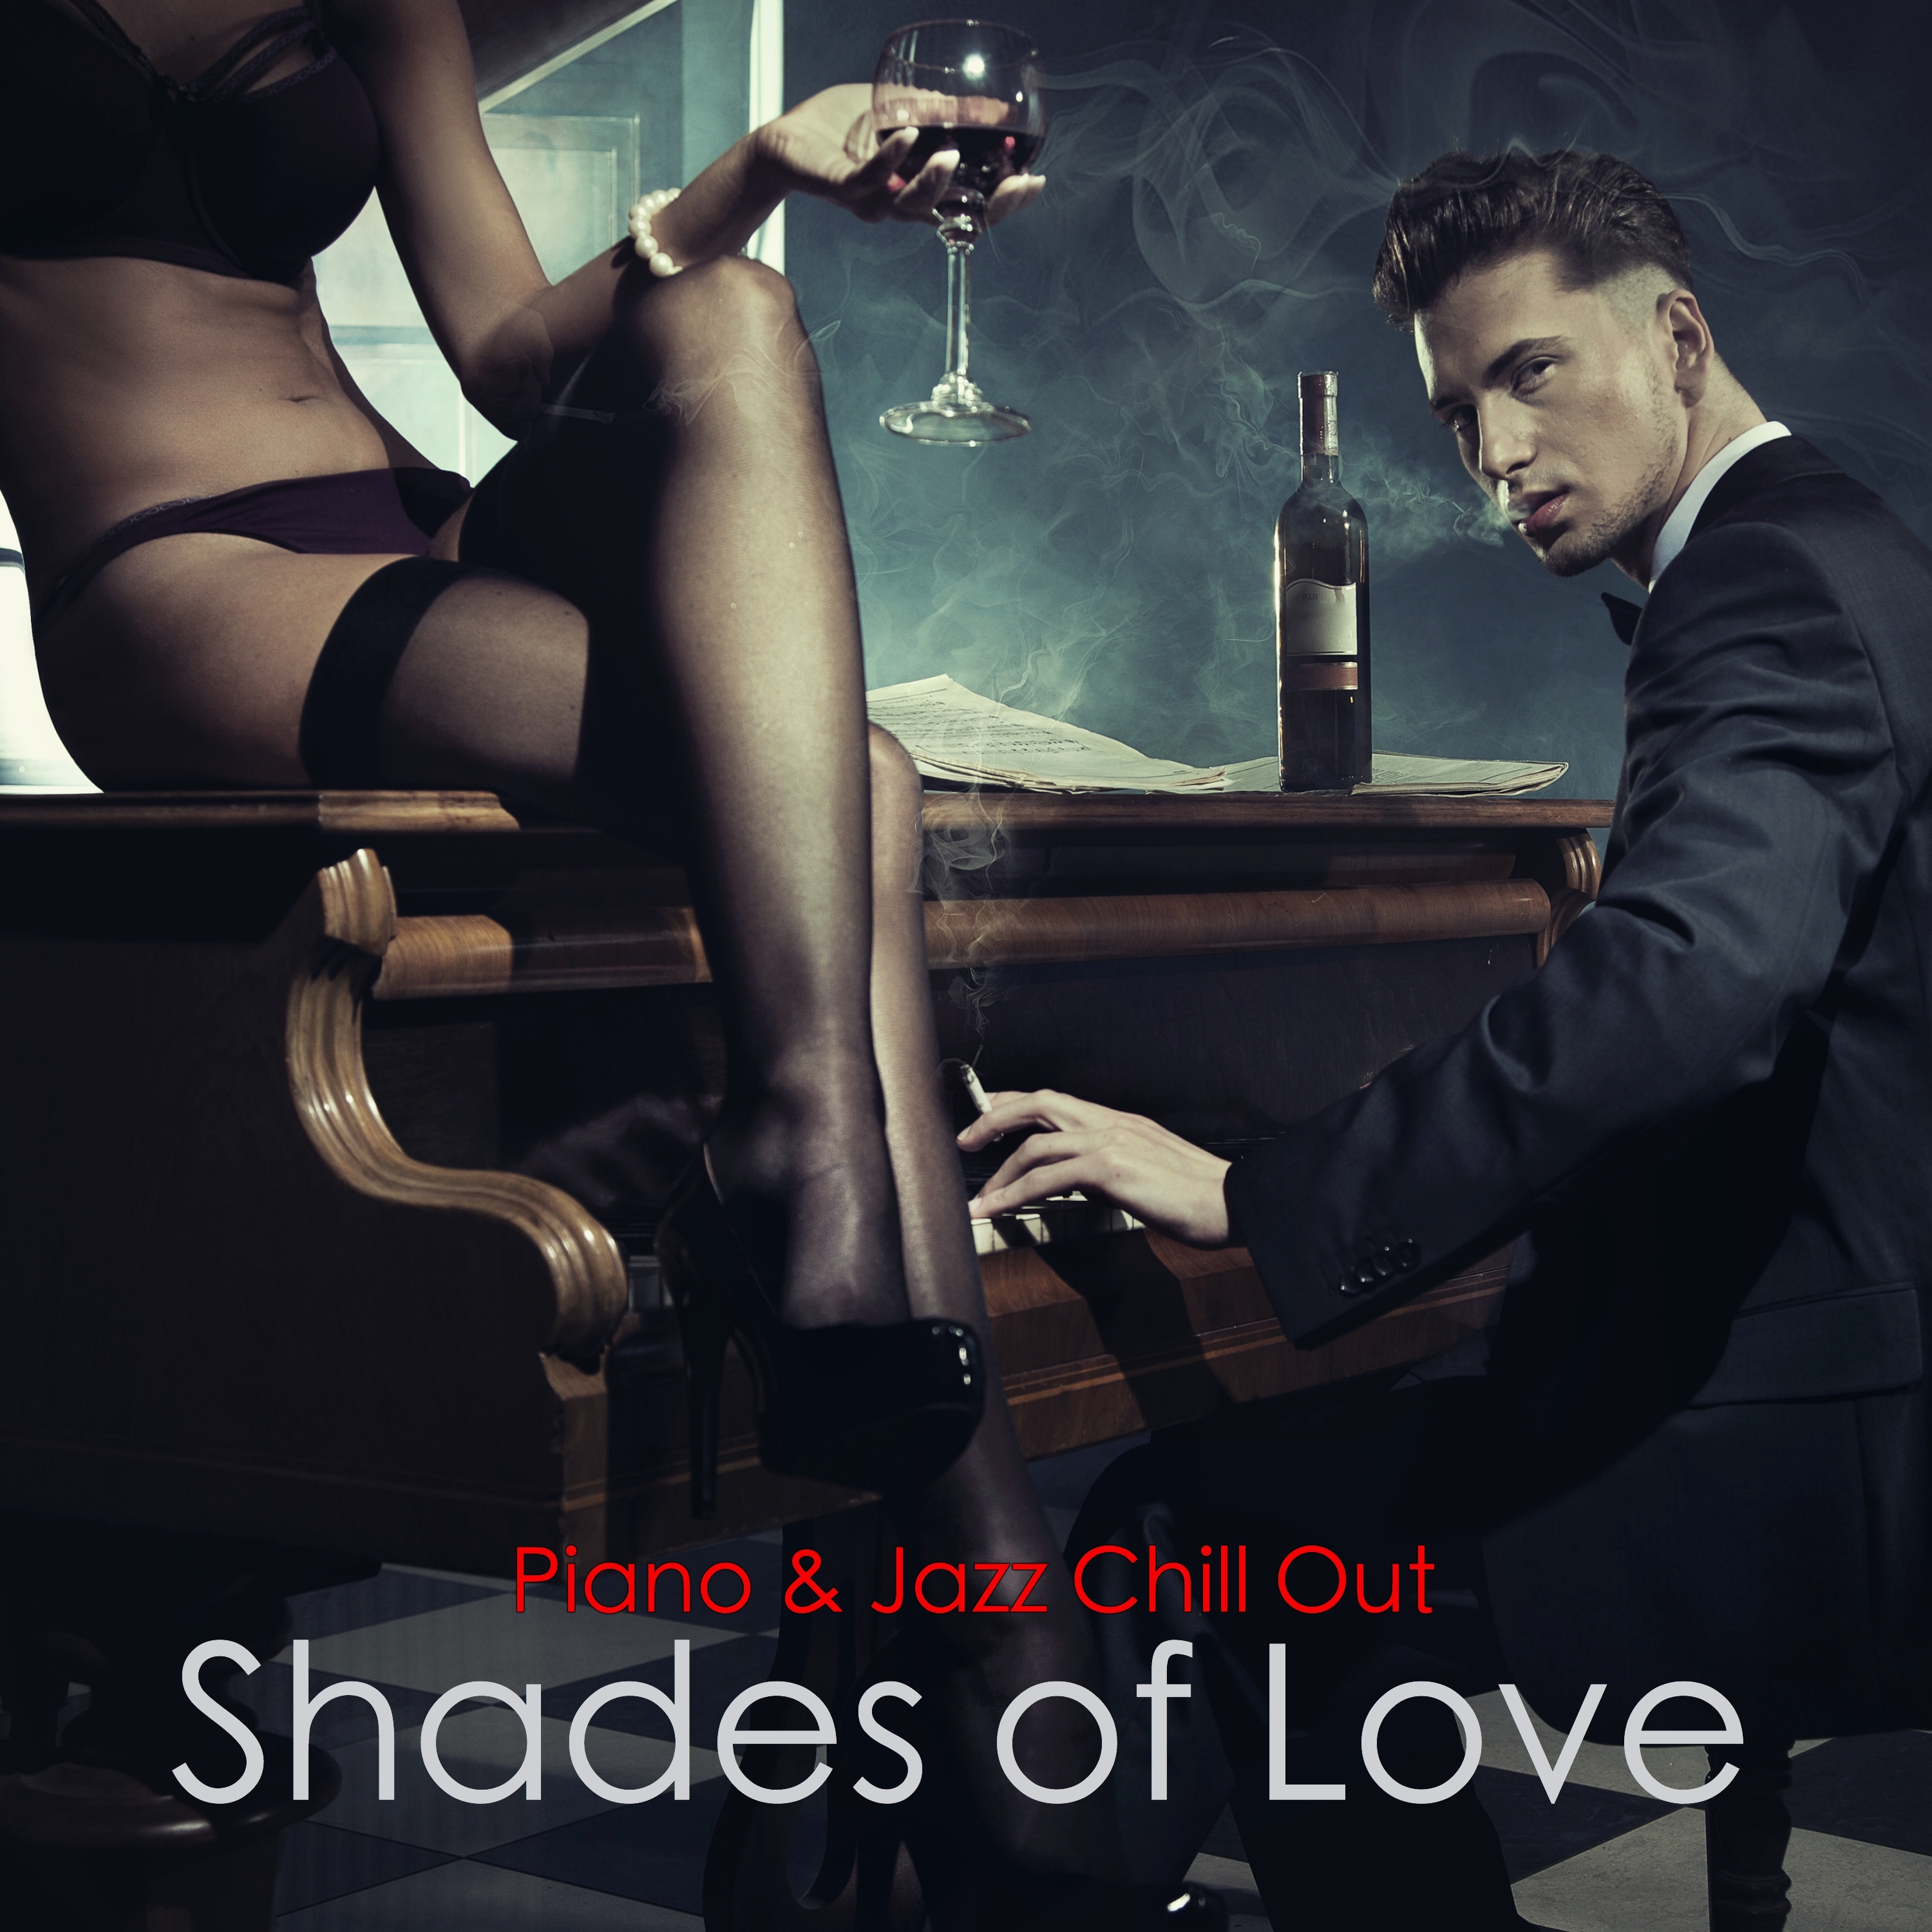 Shades of Love  Piano  Jazz Chill Out for St Valentine' s Day  Night